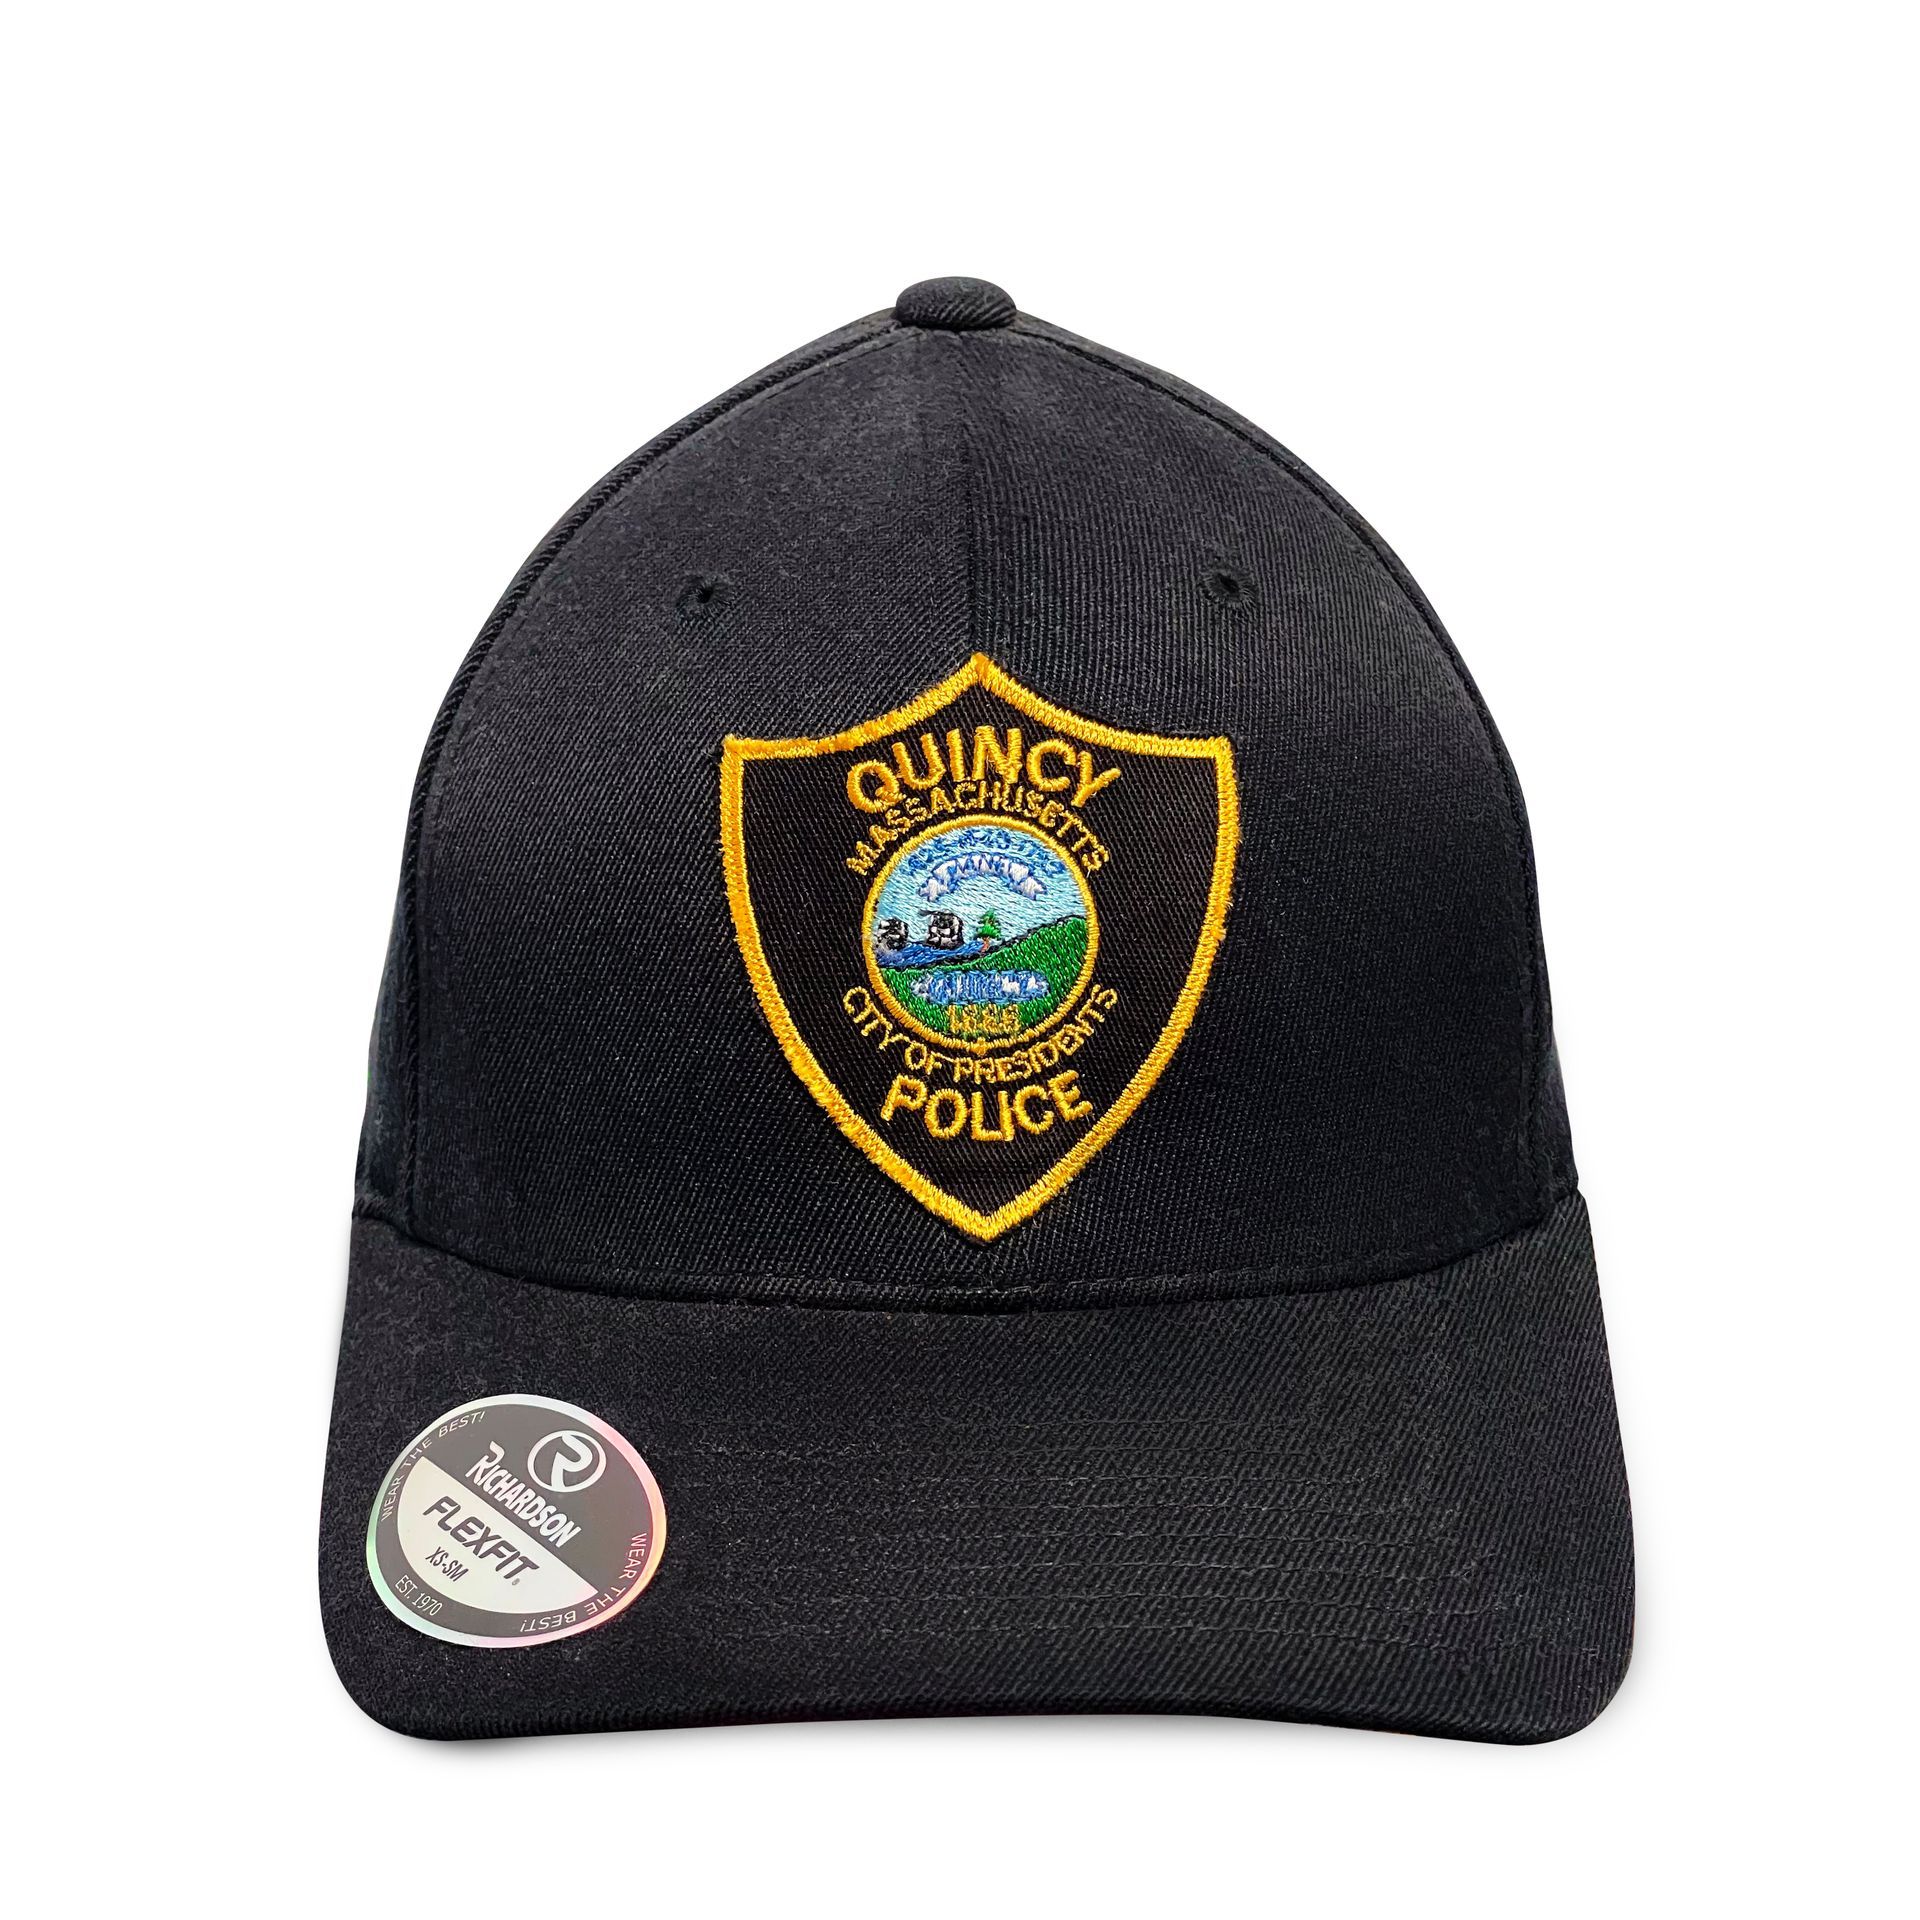 A black baseball cap with a quincy police badge on it.